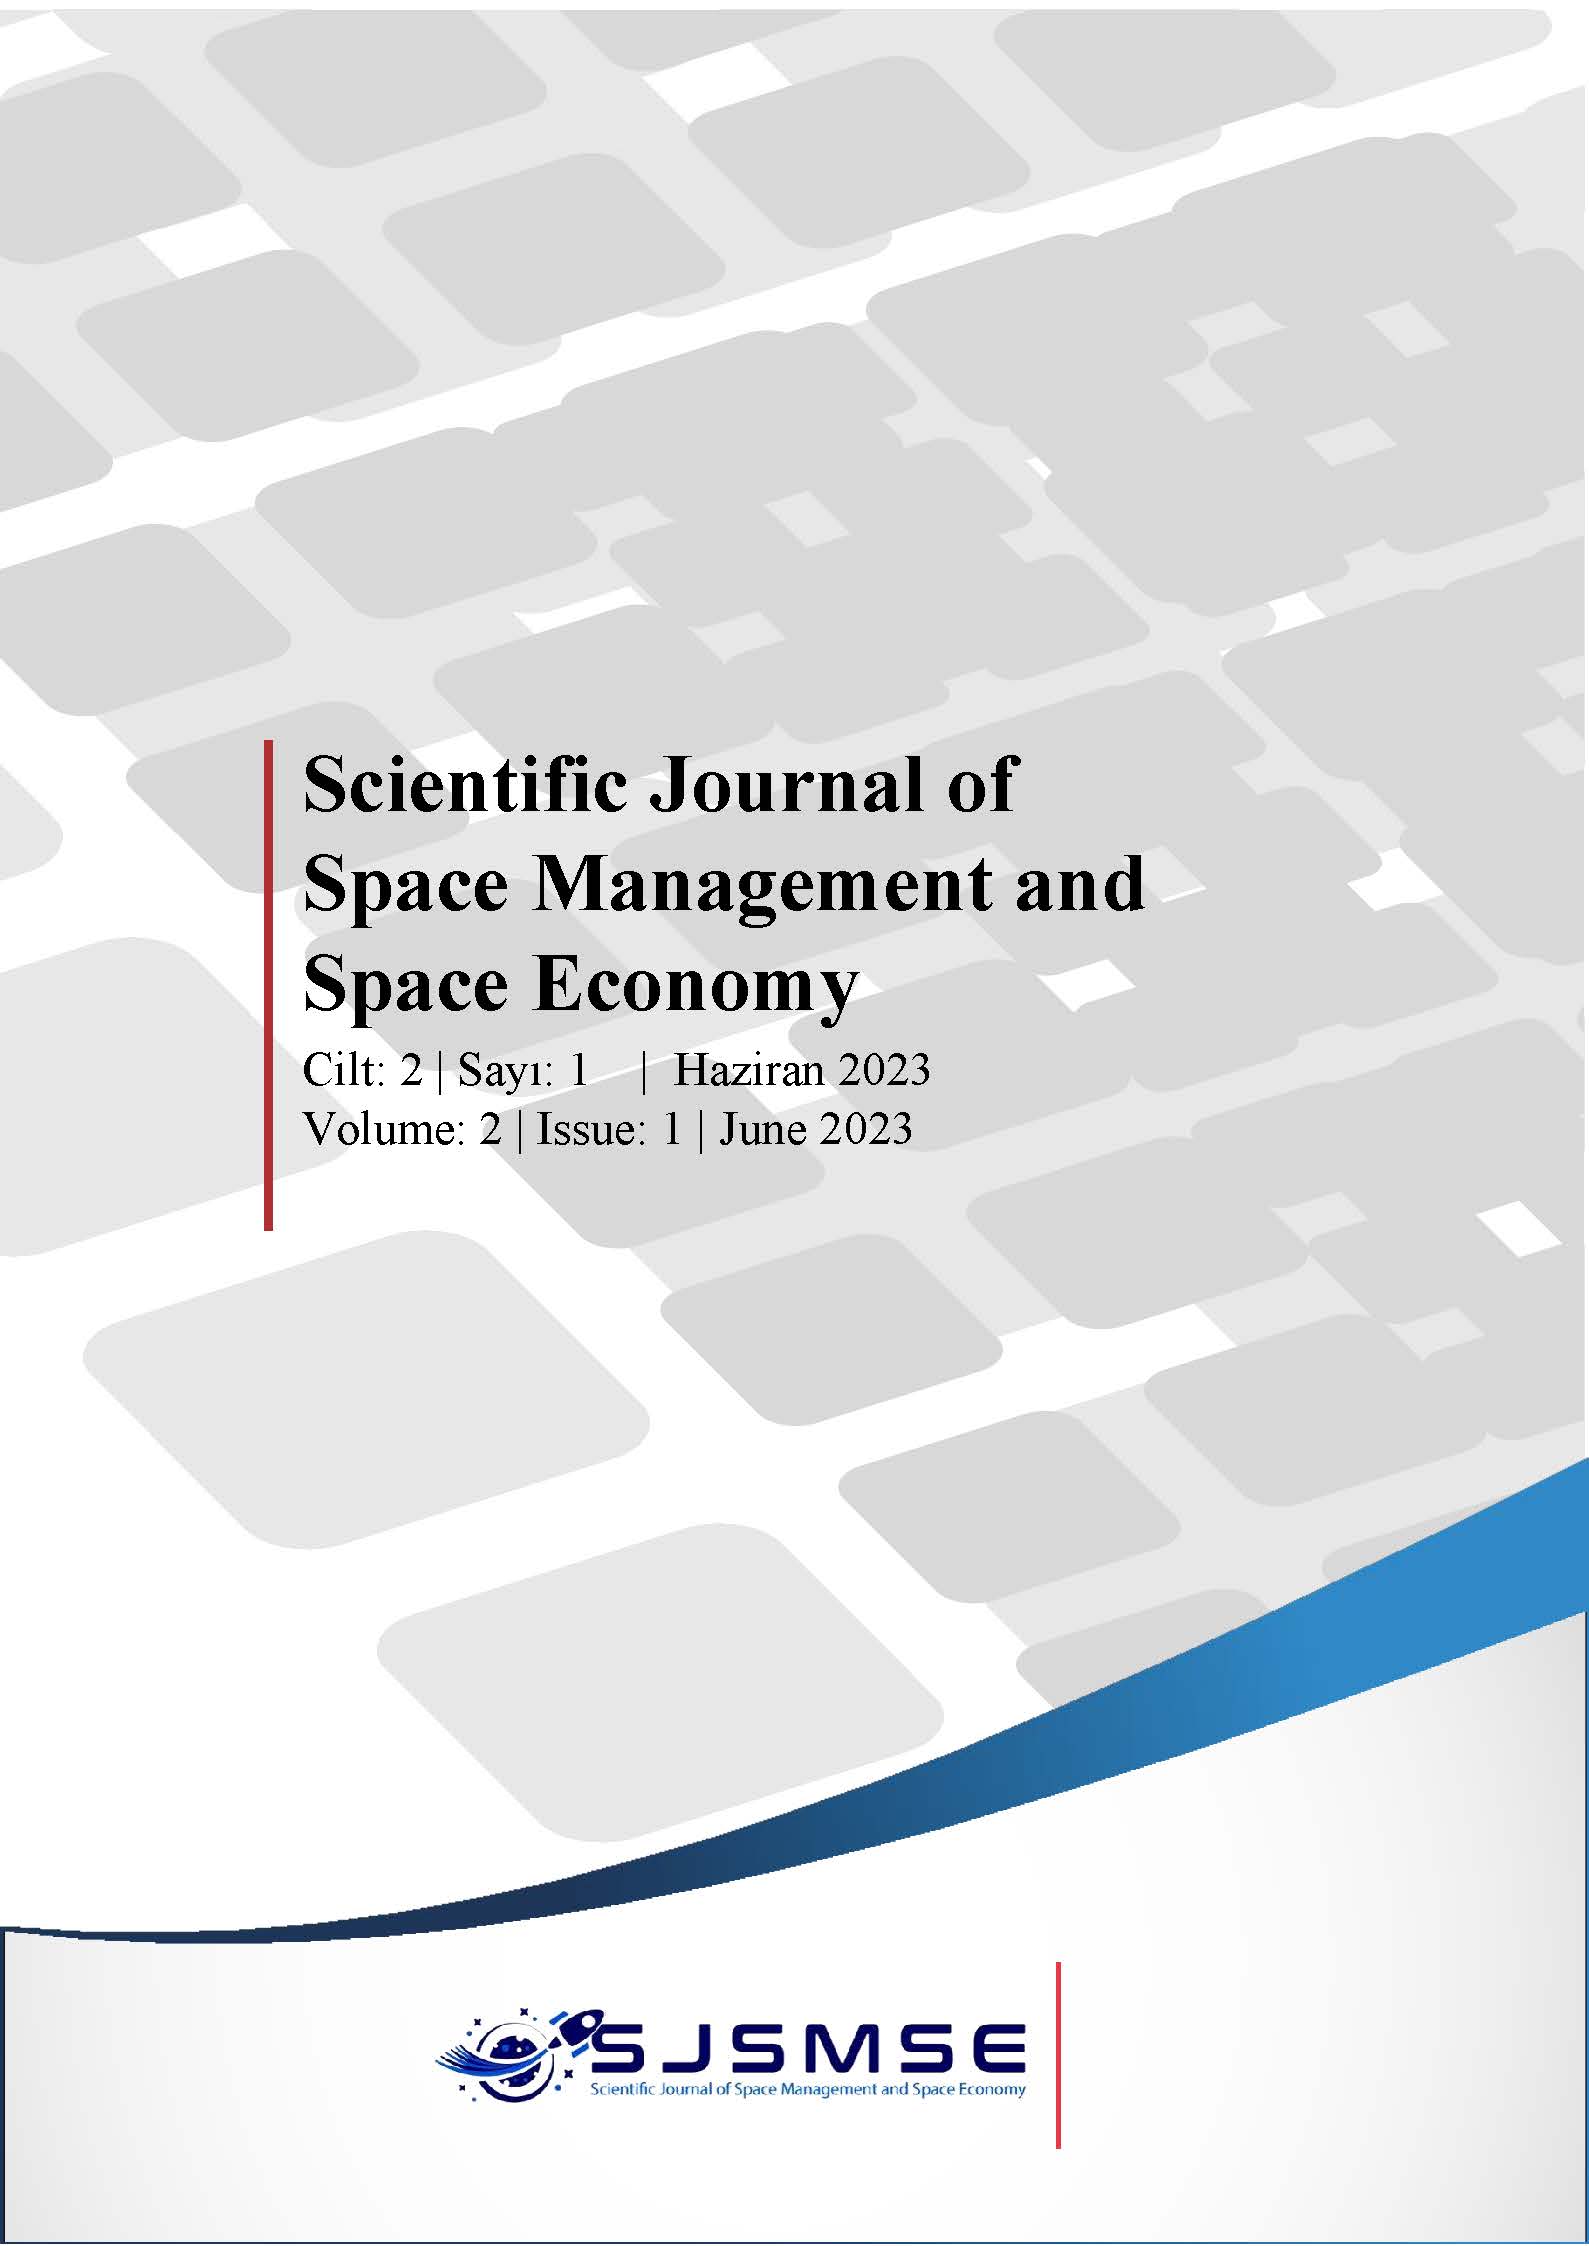 					Cilt 2 Sayı 1 (2023): Scientific Journal of Space  Management and Space Economy Gör
				